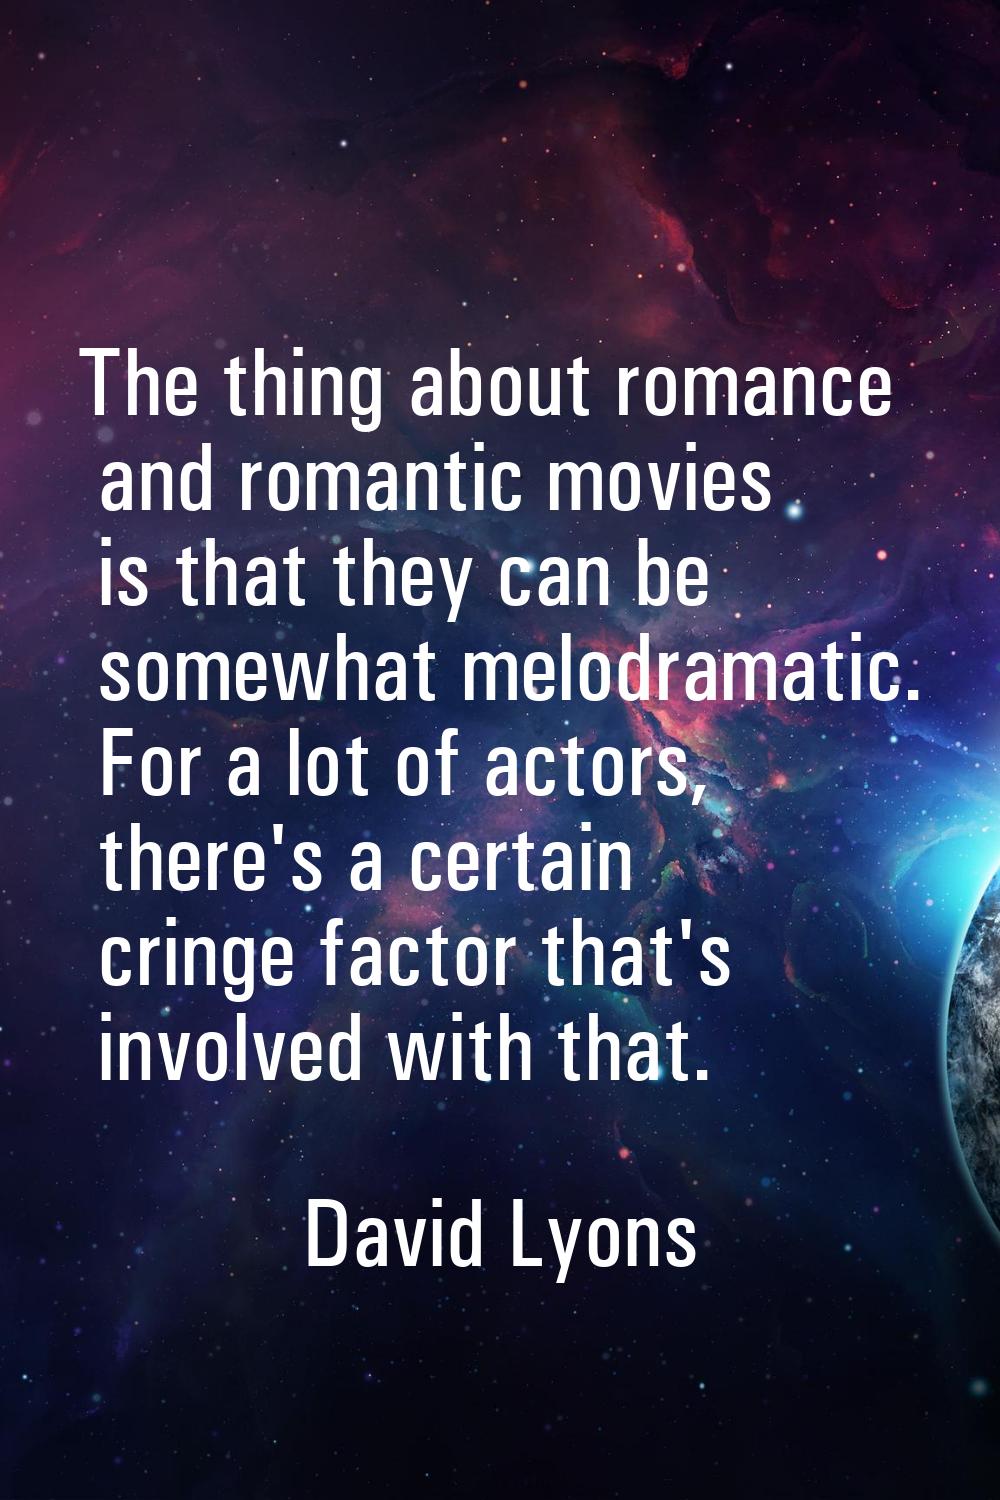 The thing about romance and romantic movies is that they can be somewhat melodramatic. For a lot of